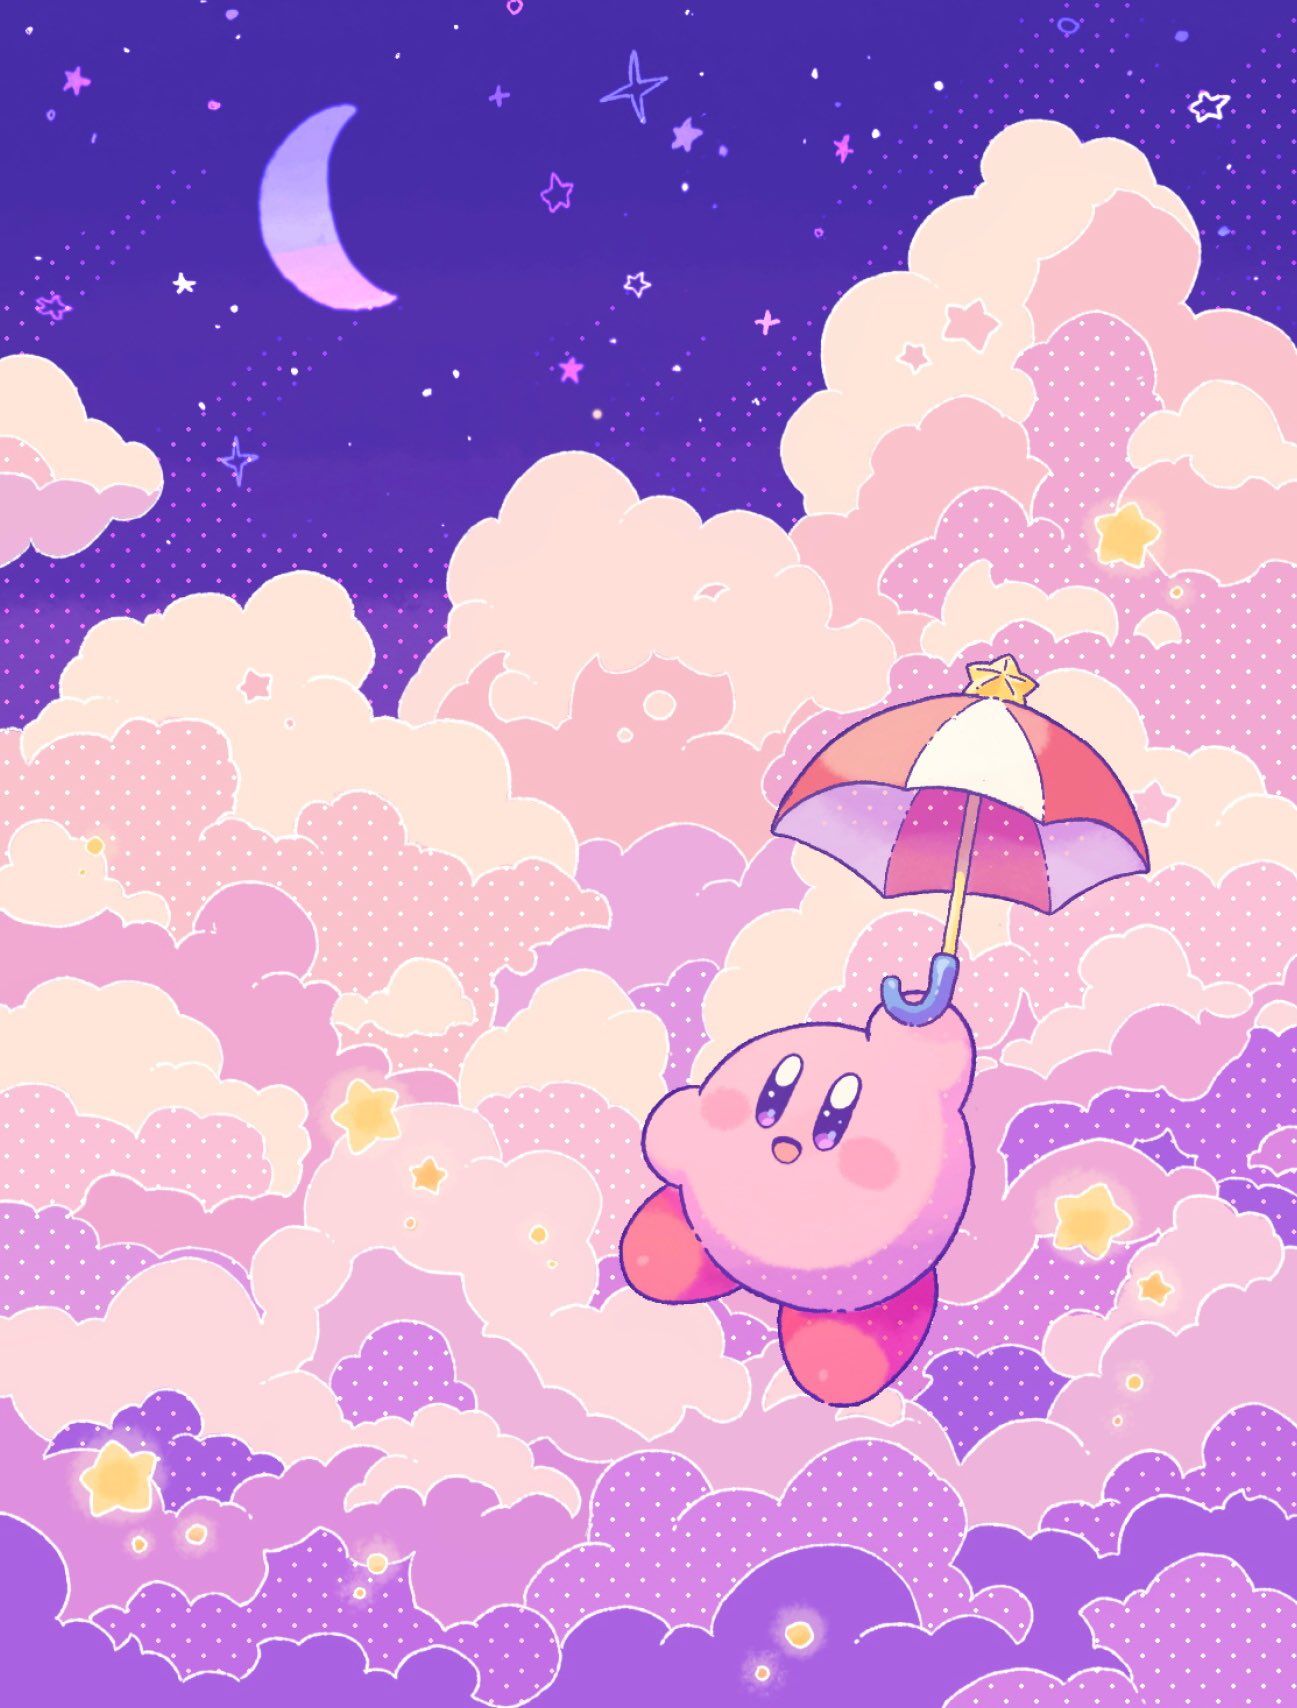 Free Download 700+ Kirby Background Desktop Full HD Images